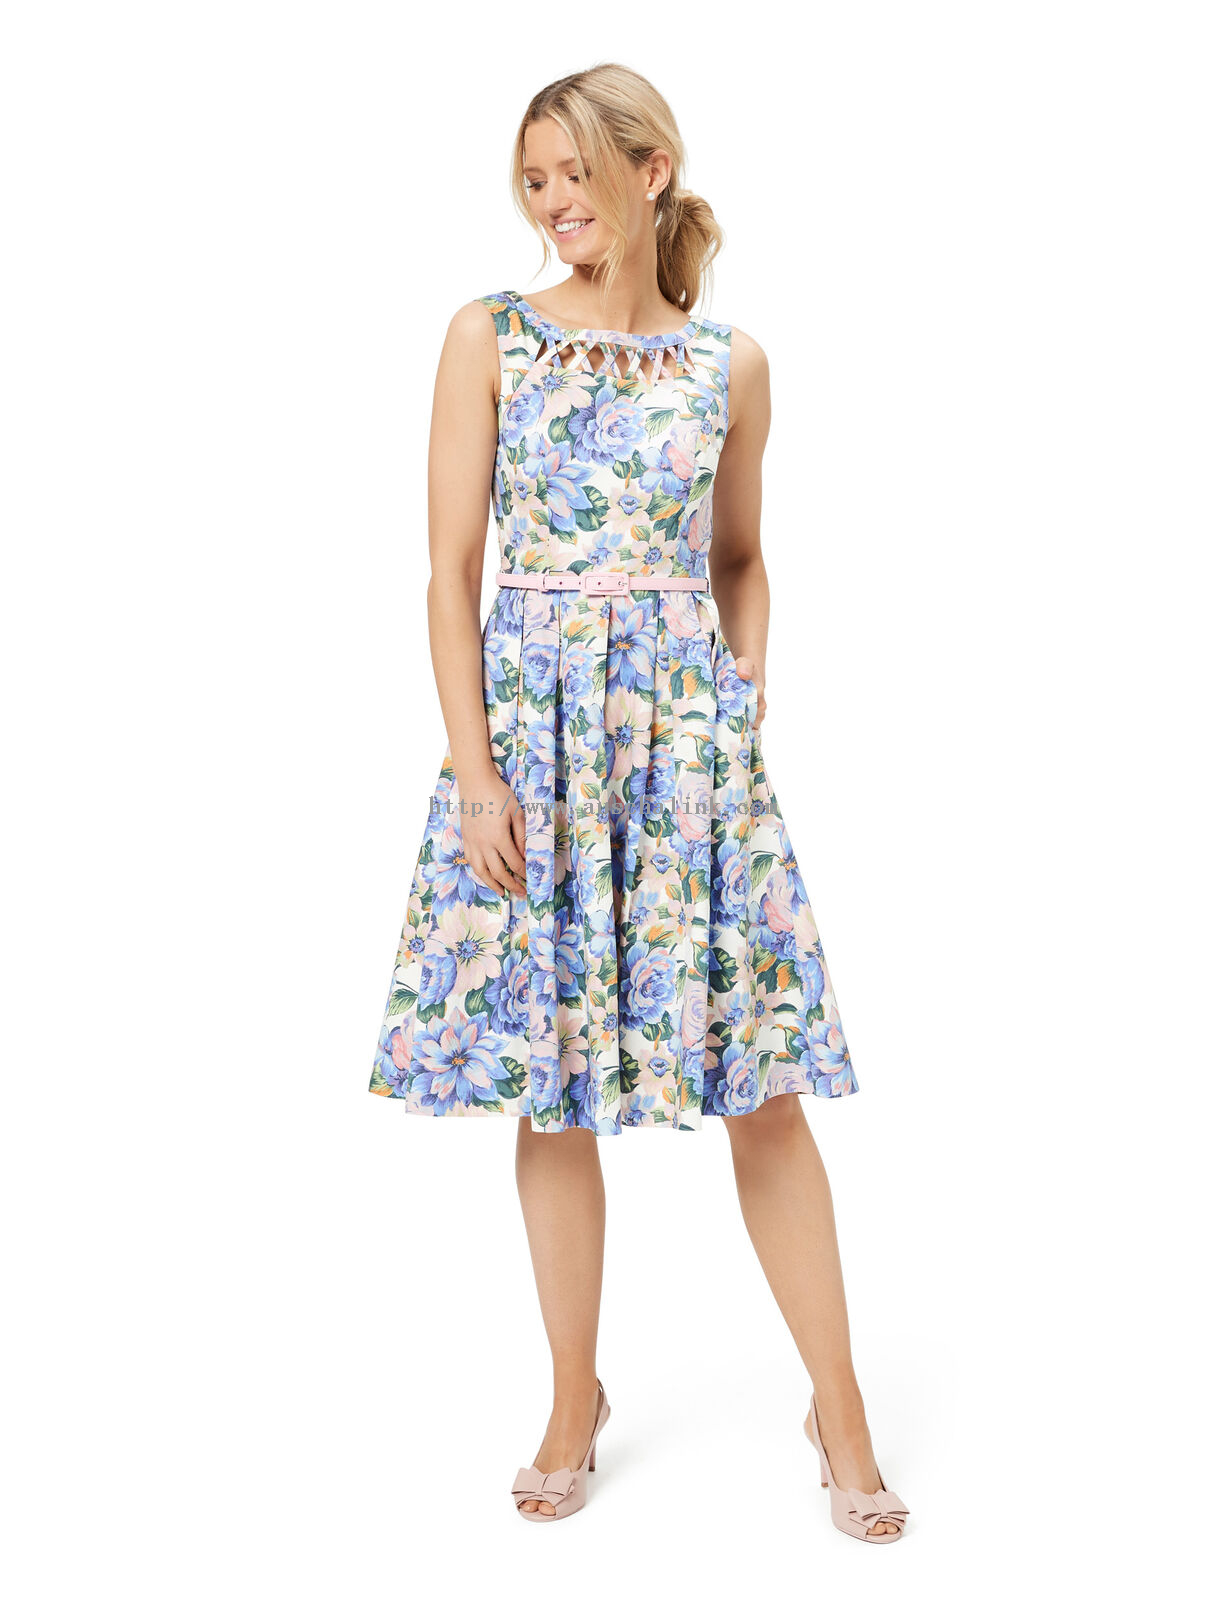 FANGIRL FLORAL PROM DRESS